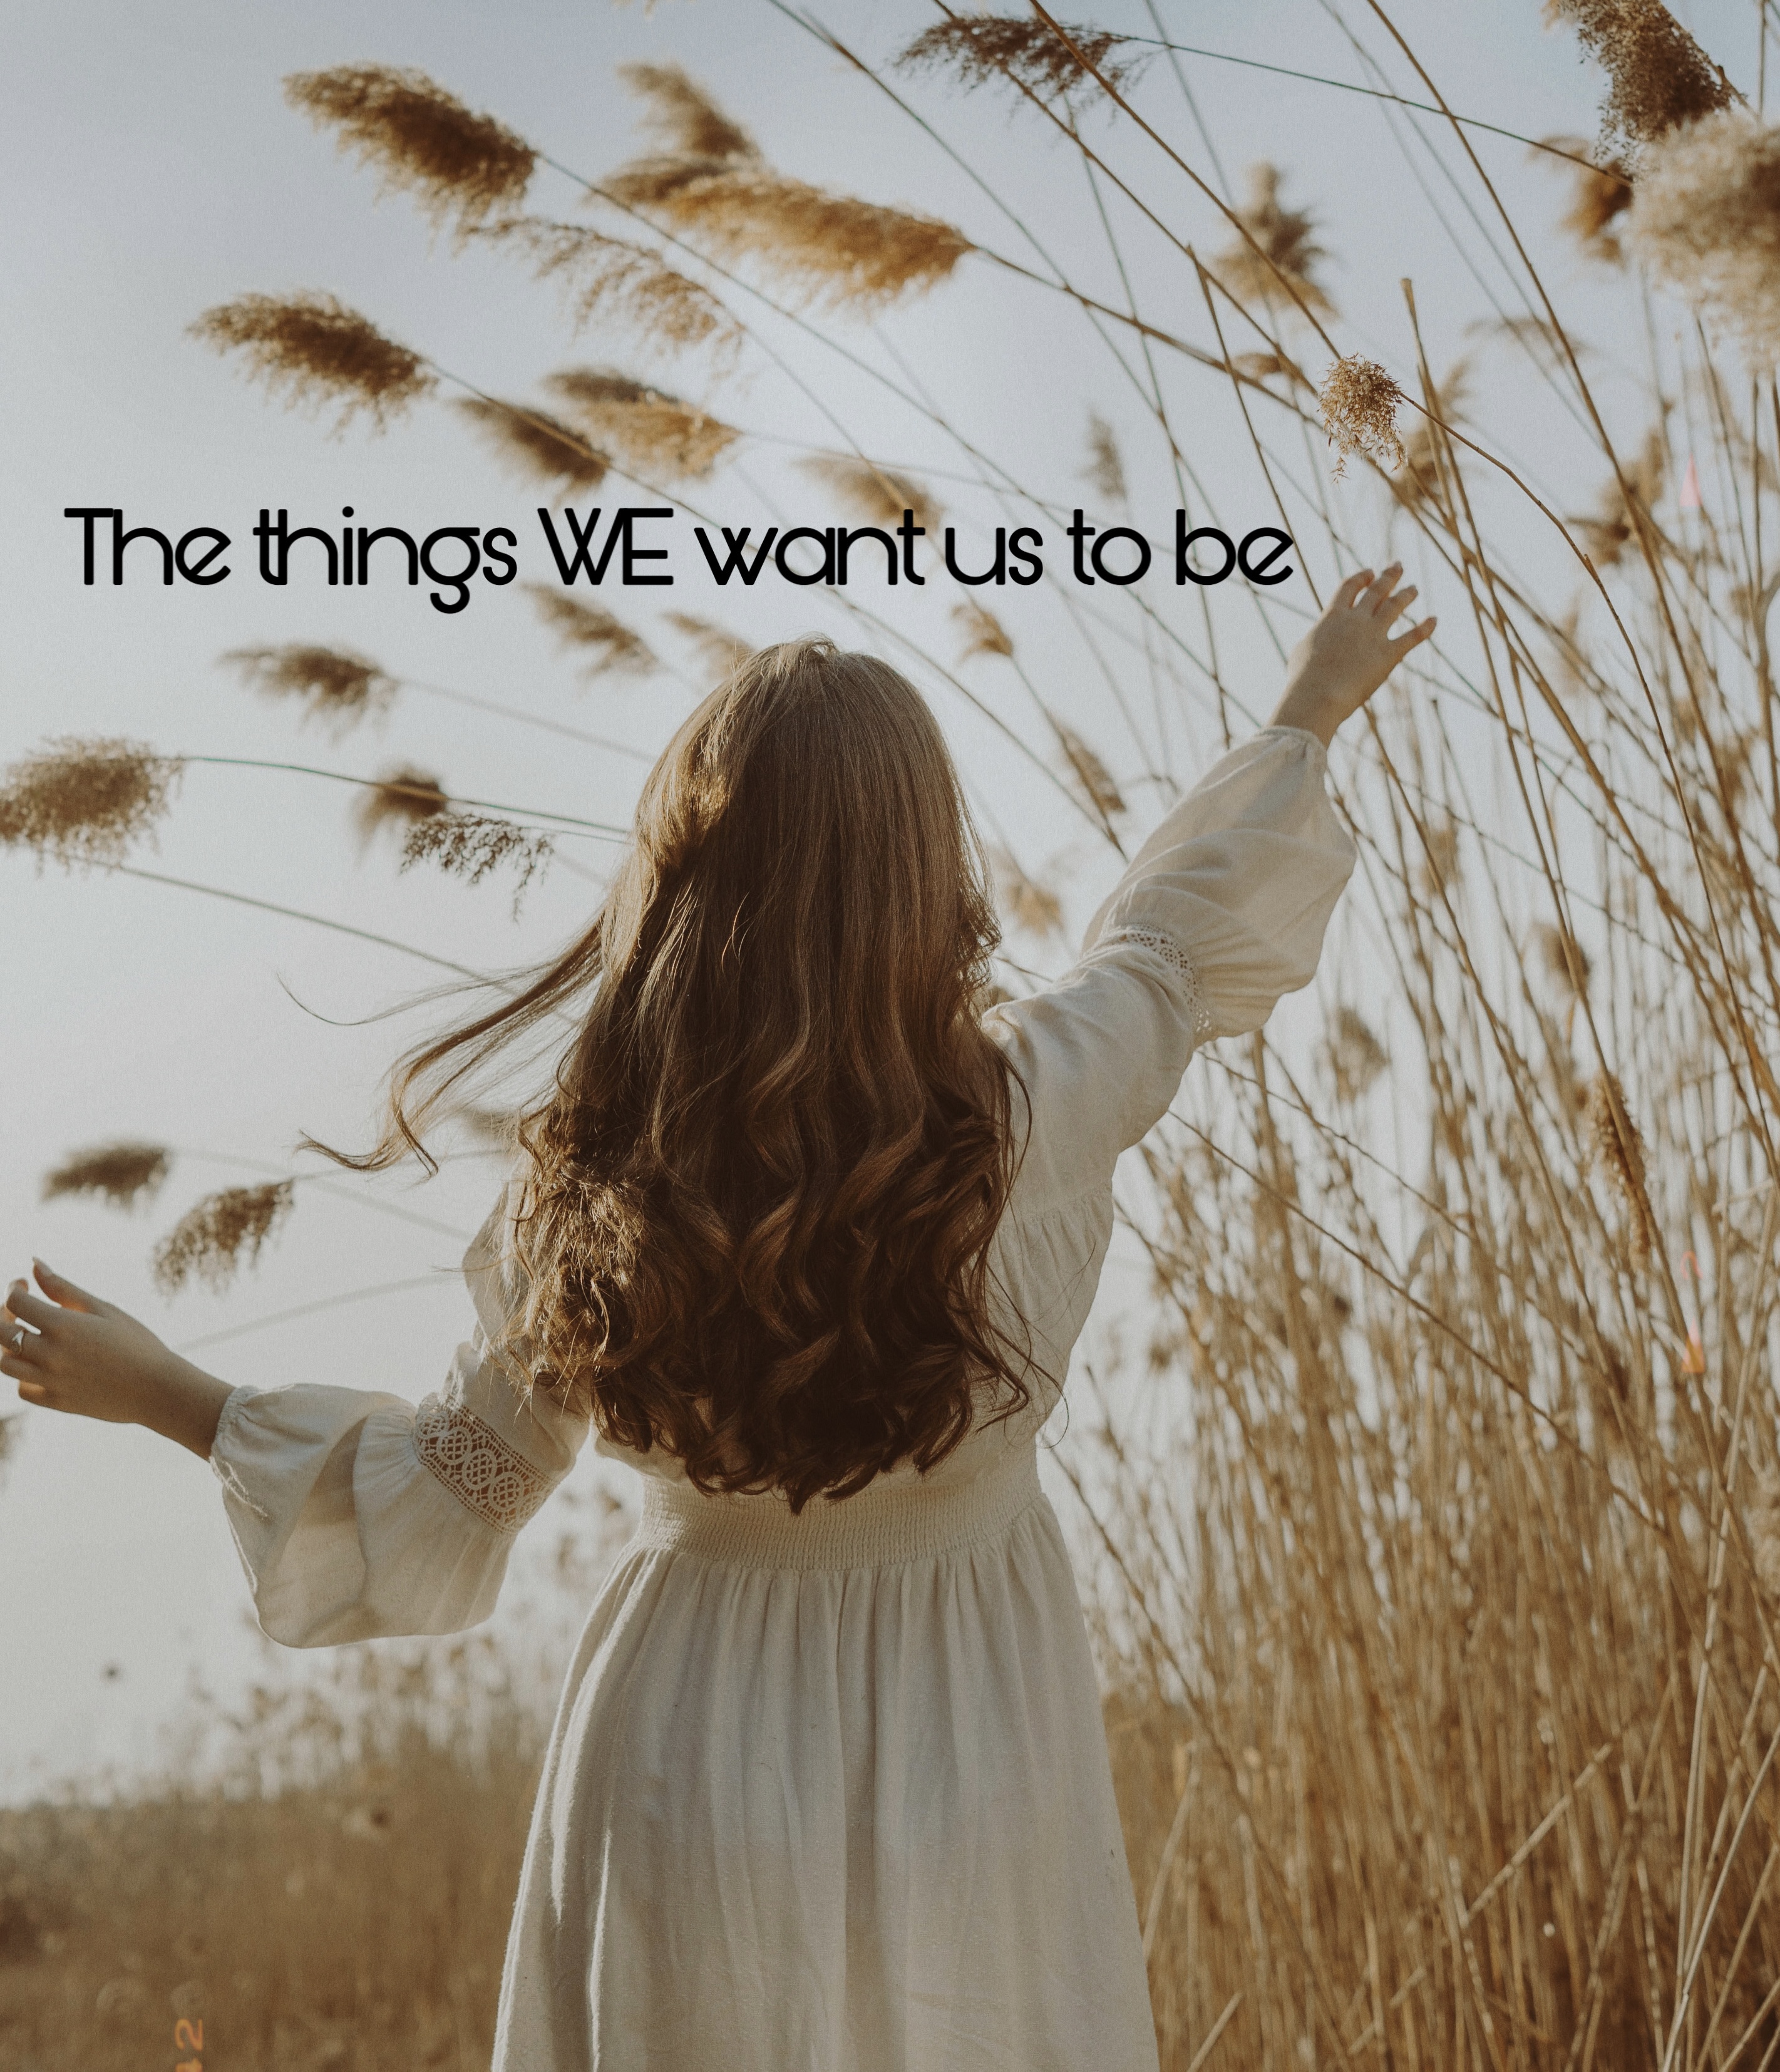 The things WE want us to be